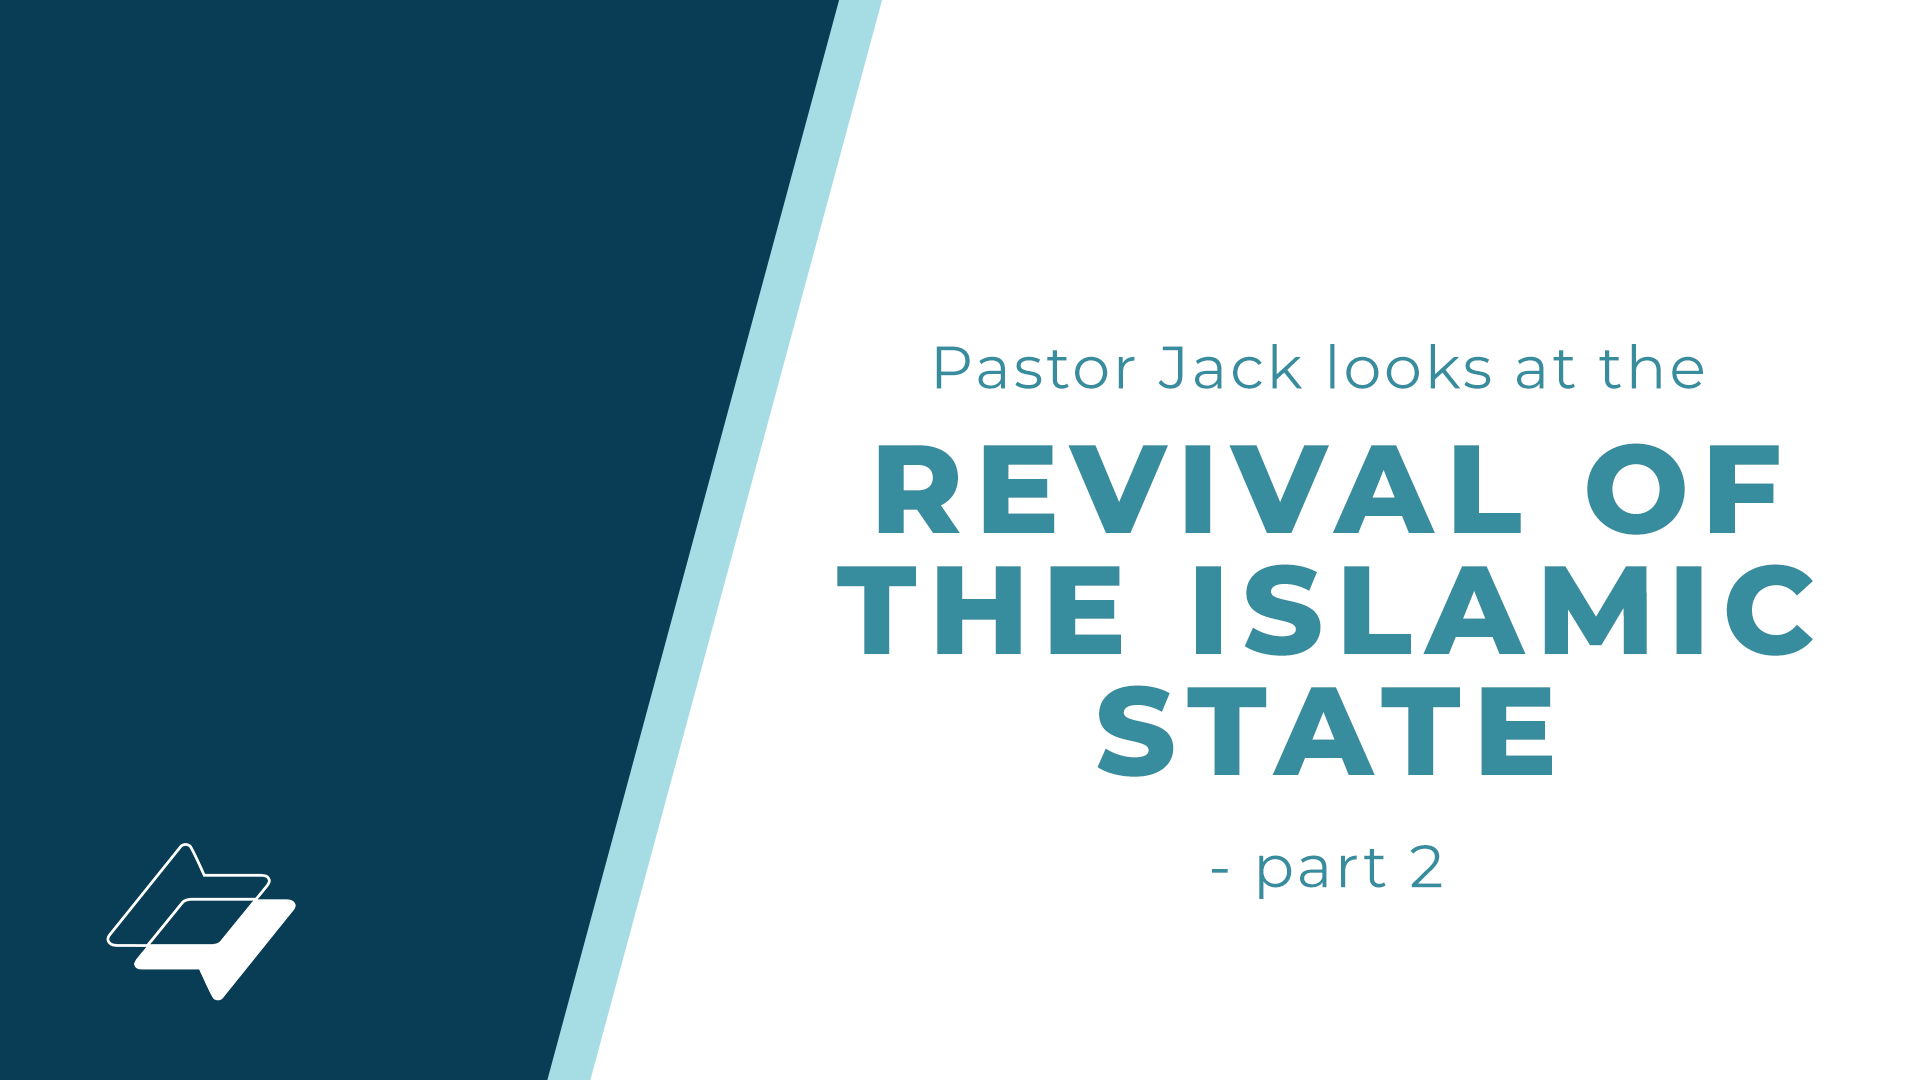 Pastor Jack looks at the Revival of the Islamic State – Part 2